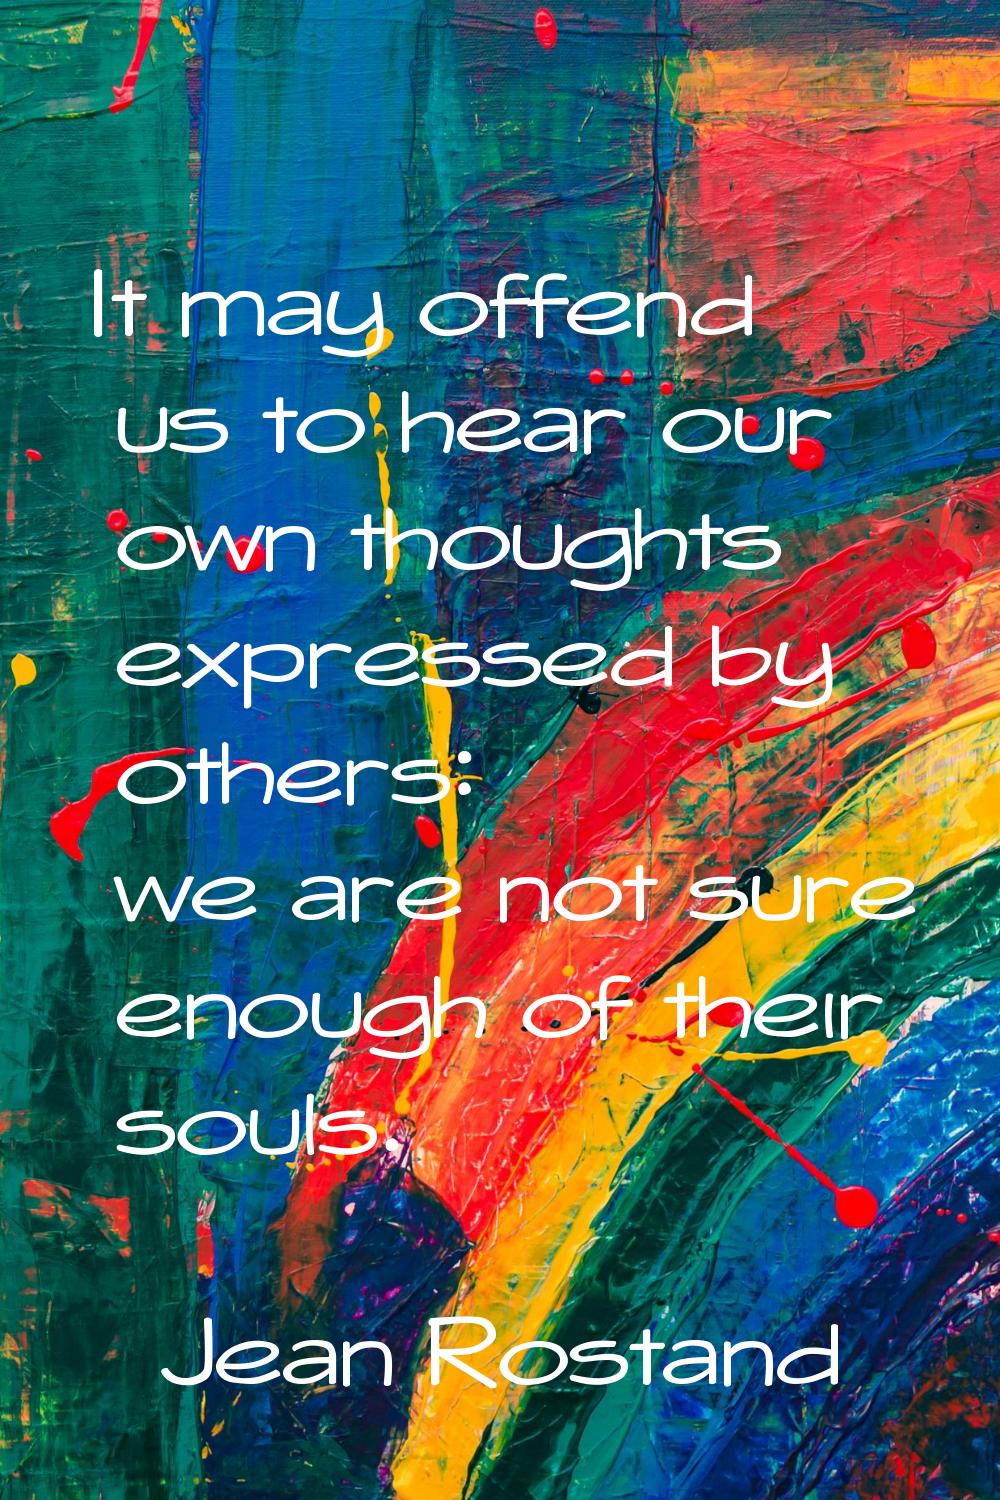 It may offend us to hear our own thoughts expressed by others: we are not sure enough of their soul